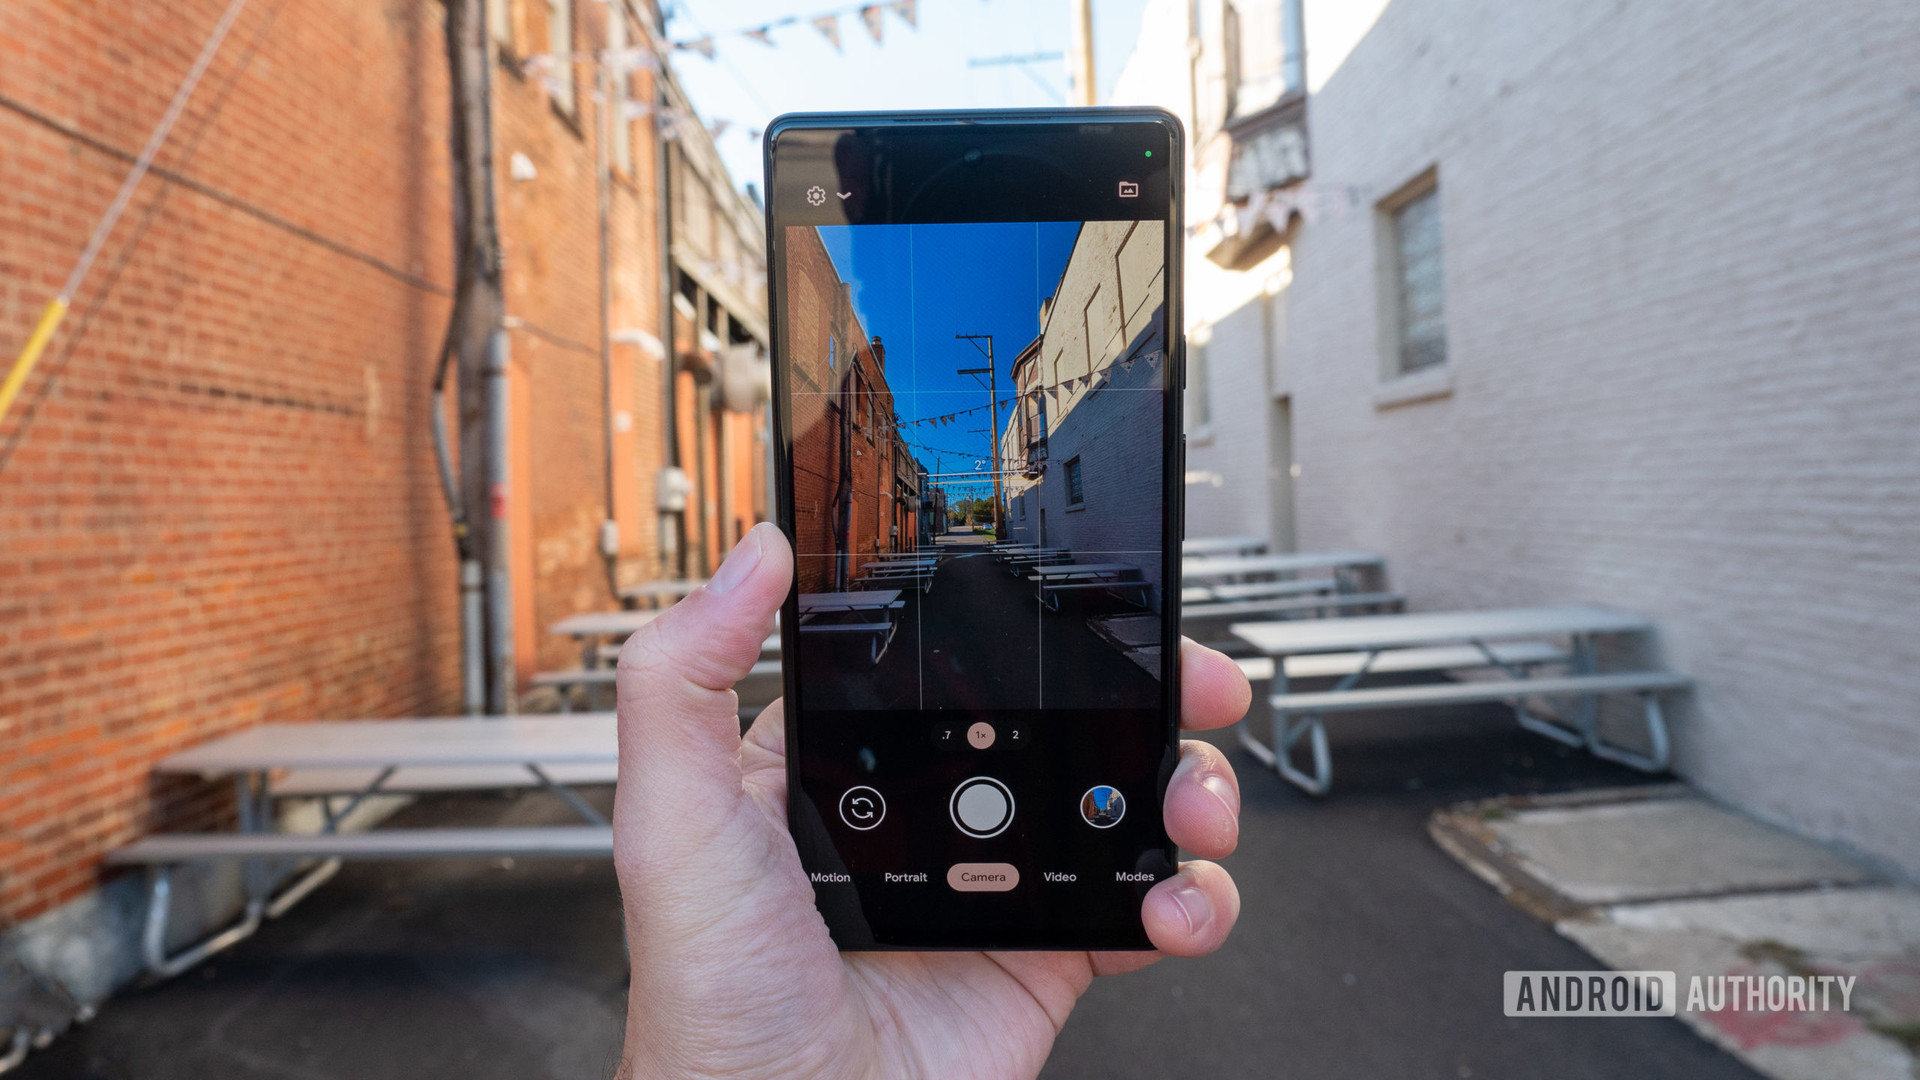 The Google Pixel 6 in the alley showing the camera app